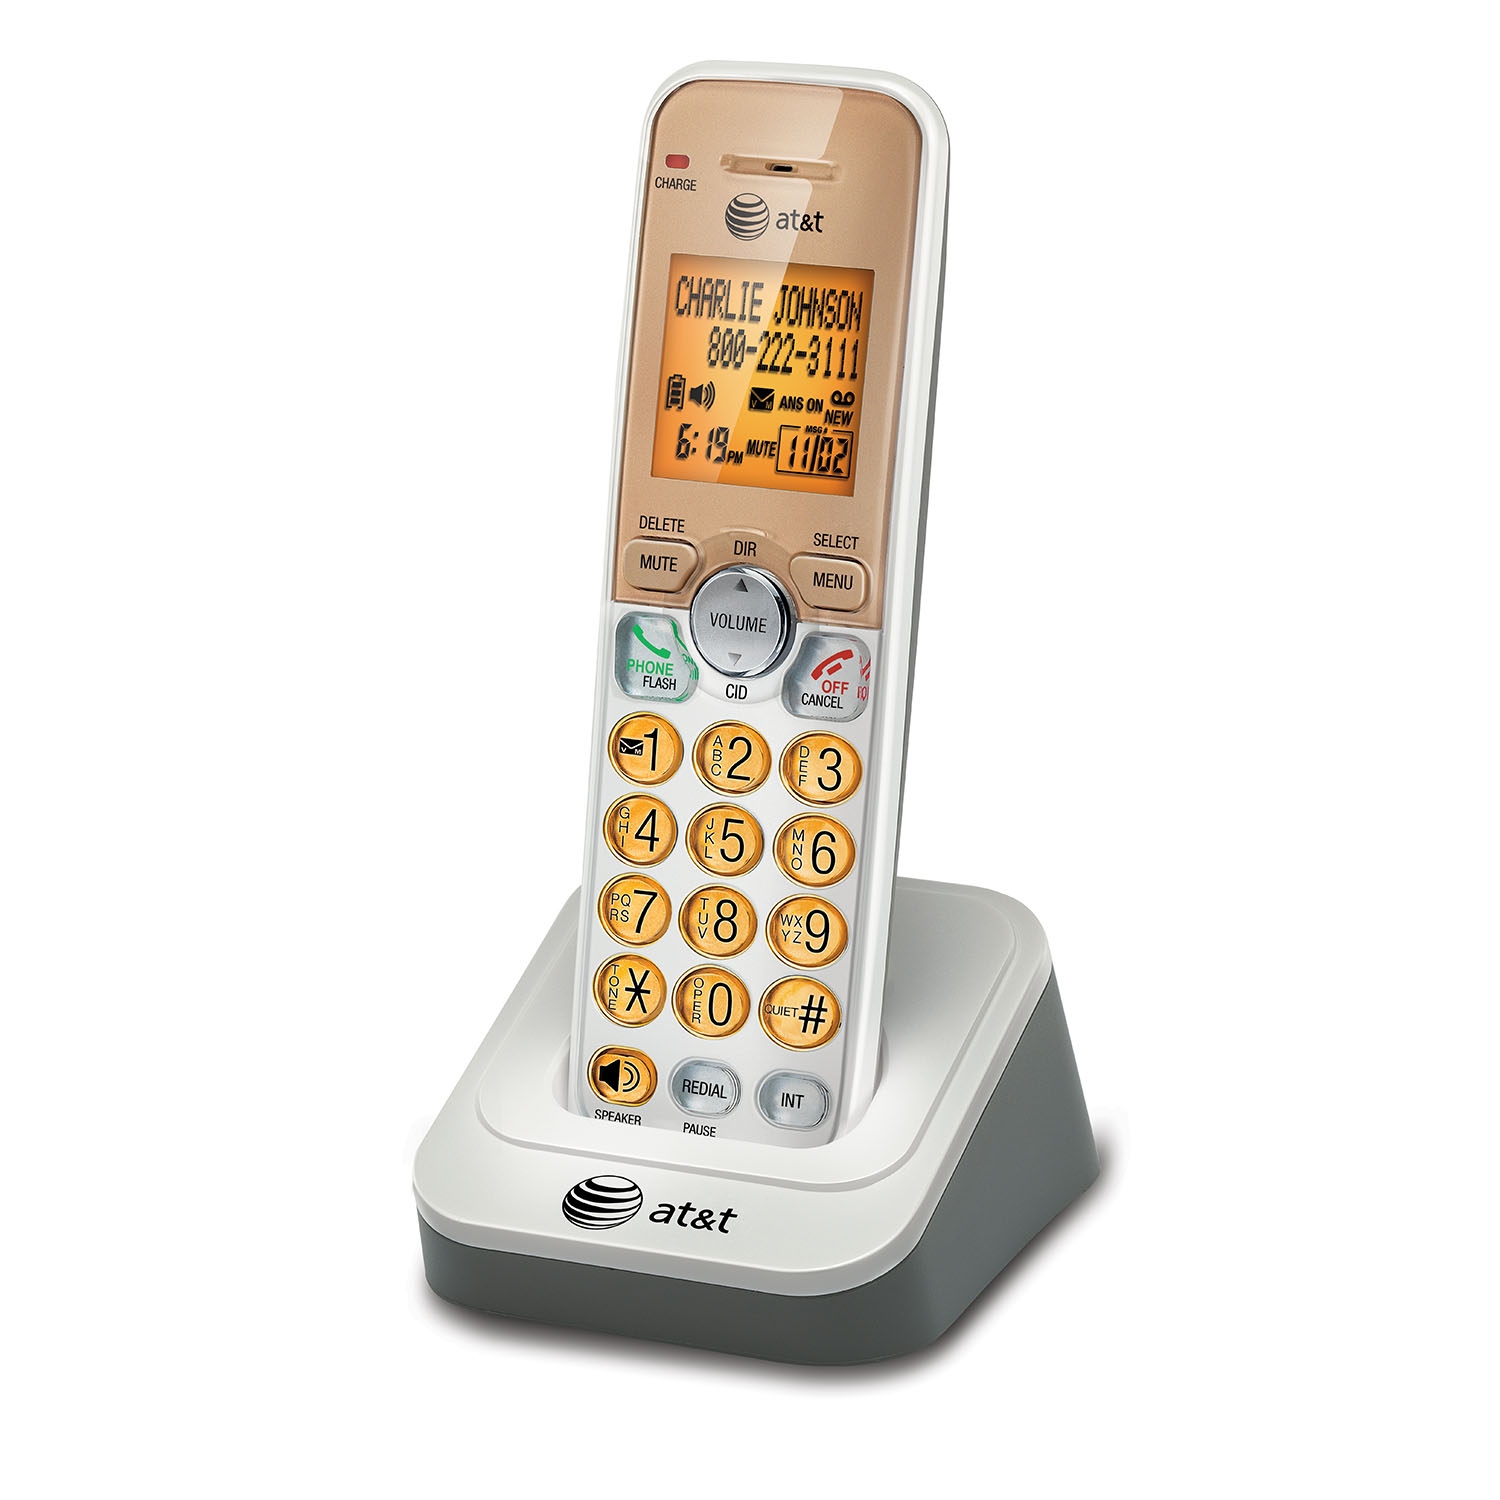 3 handset cordless answering system with caller ID/call waiting - view 4